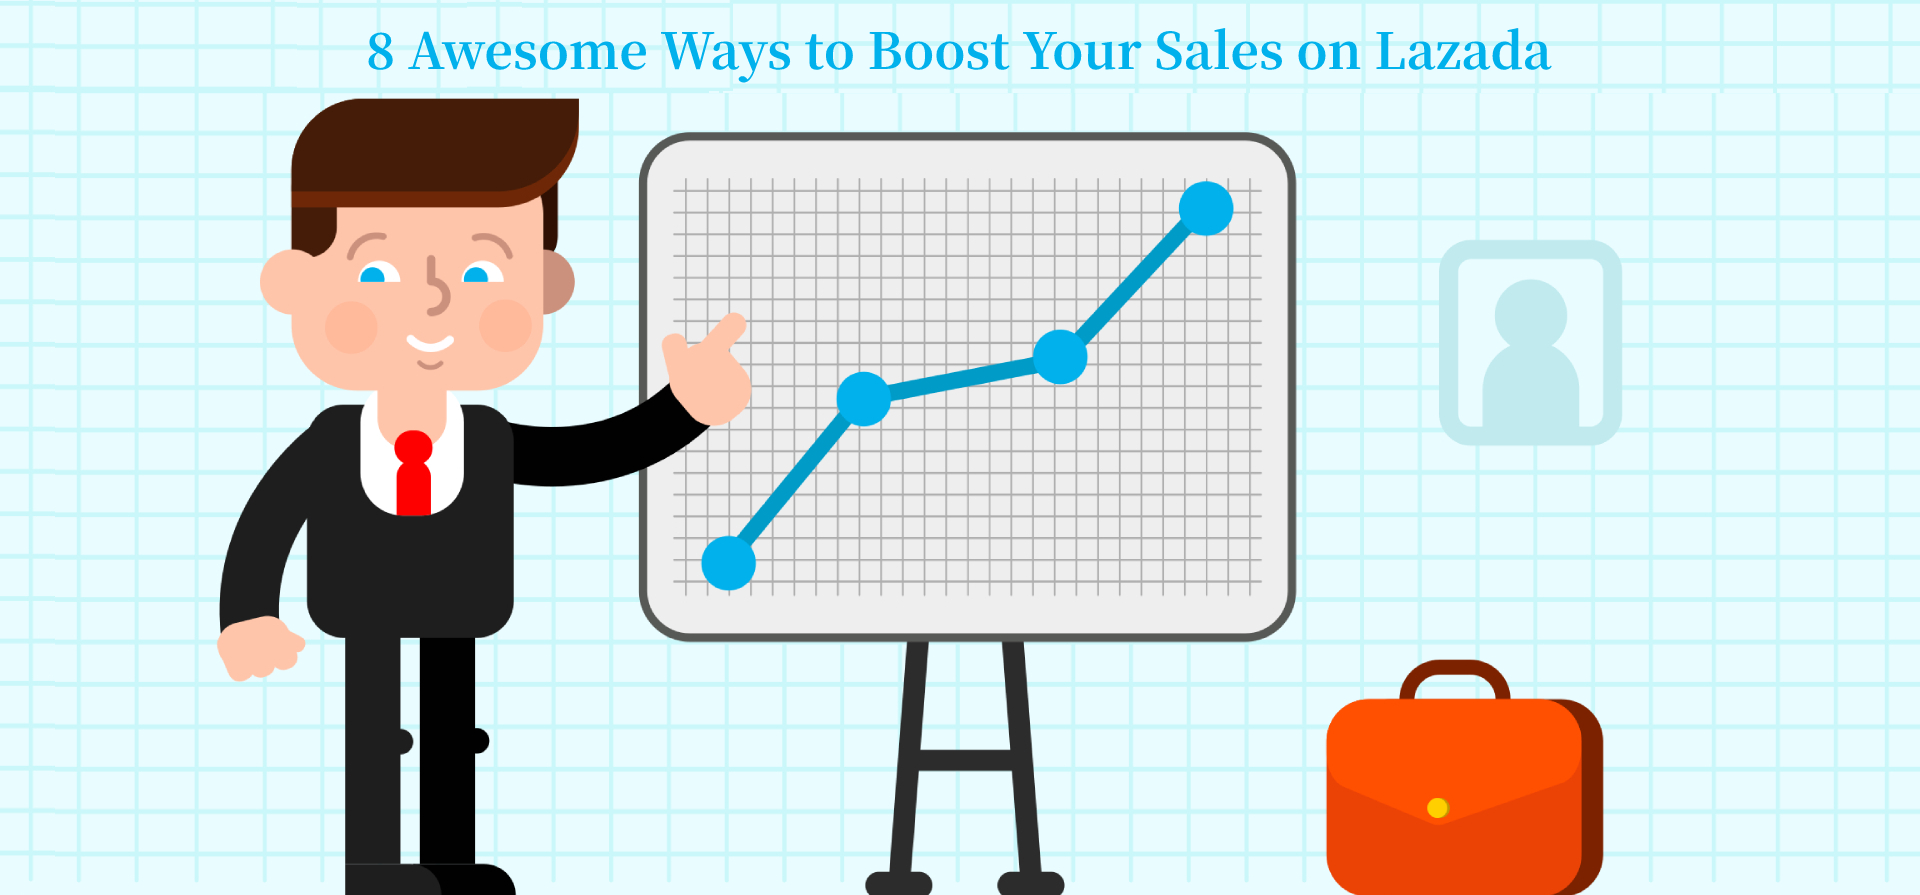 8 Awesome Ways to Boost Your Sales on Lazada